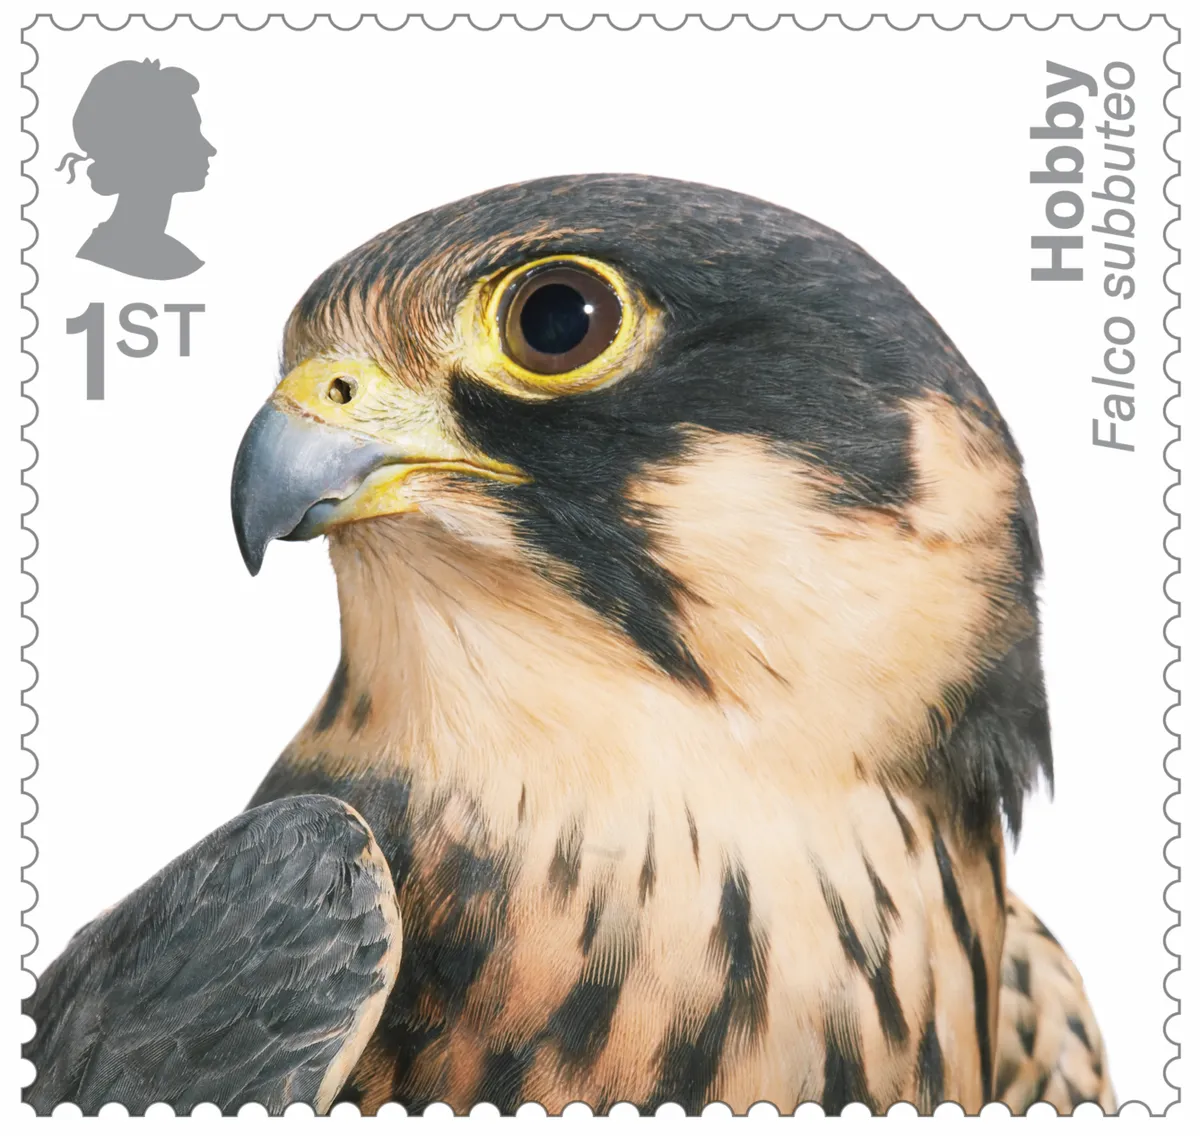 Bird of prey stamp collection - hobby. © Tim Flach/Royal Mail.